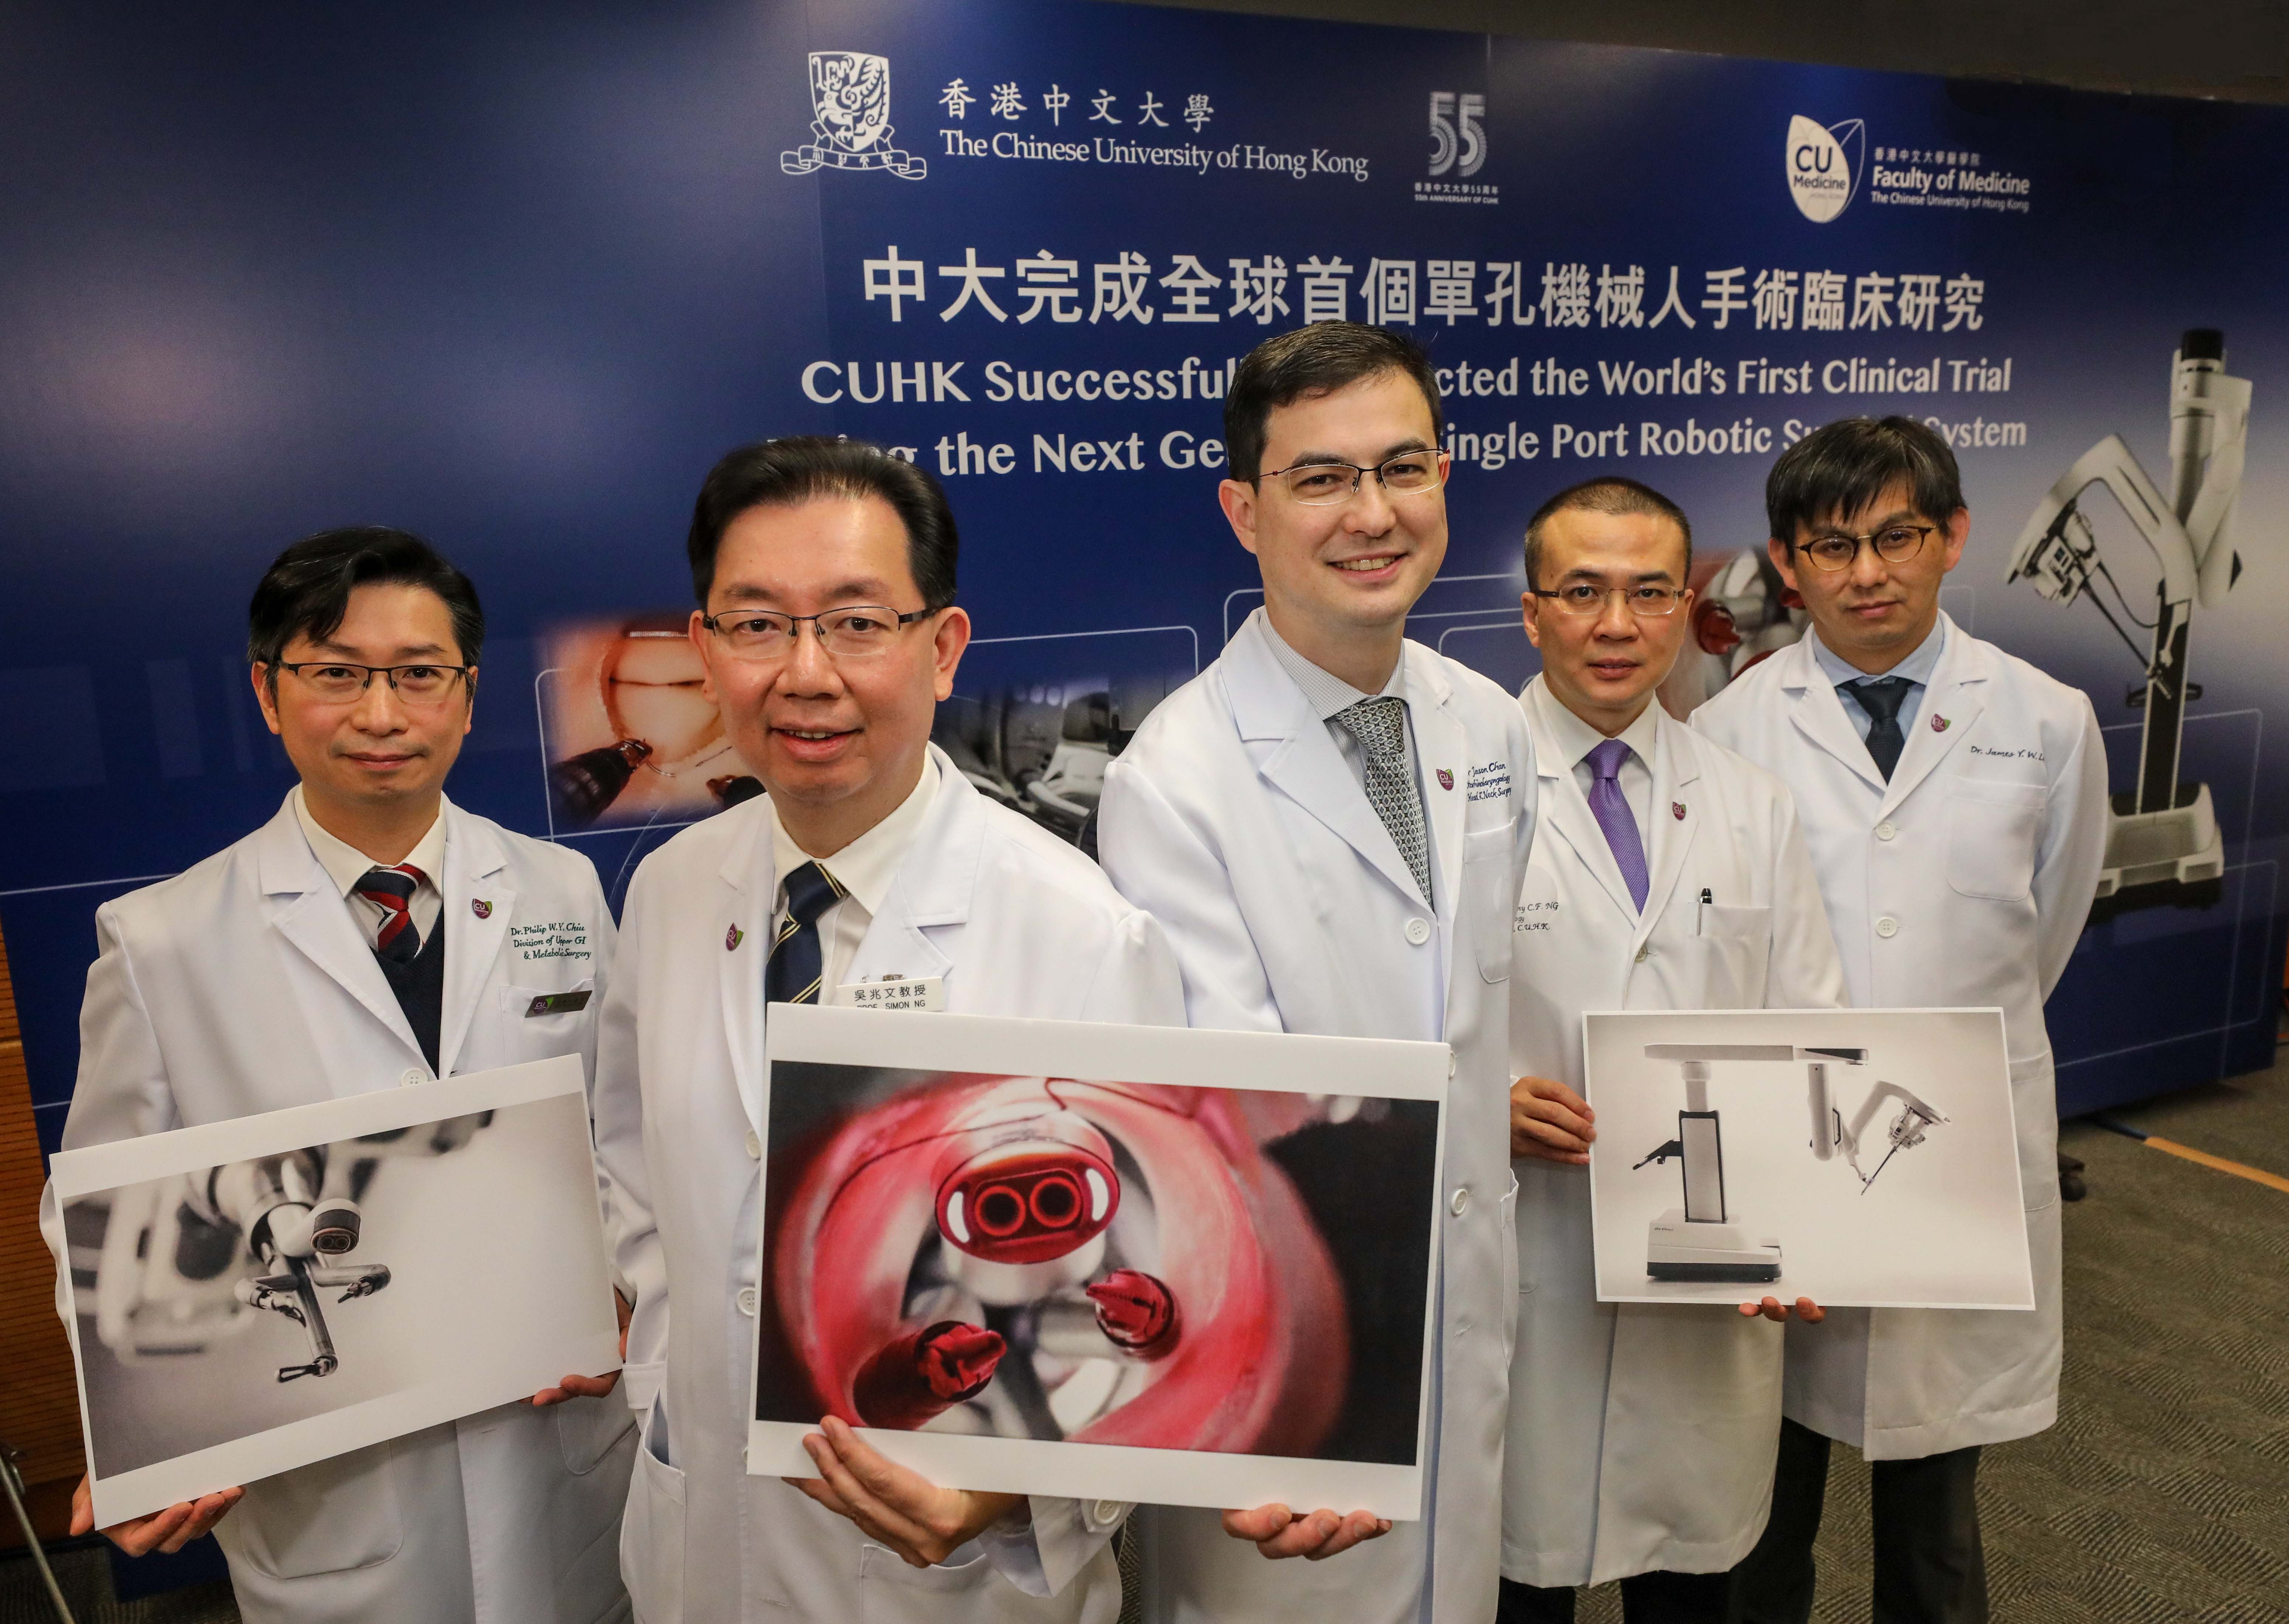 CUHK Medicine successfully conducted the world’s first multi-specialty clinical trial using the next generation single port robotic surgical system. The study results demonstrated that multiple procedures could be performed through a single entry site and the novel system allows surgeons to reach deep spaces previously difficult to reach to carry out delicate procedures with precision. (From right) Professor James LAU, Chairman of the Department of Surgery; Professor Anthony NG, Division of Urology, Department of Surgery; Dr. Jason CHAN, Assistant Professor, Department of Otorhinolaryngology, Head and Neck Surgery; Professor Simon NG, Division of Colorectal Surgery, Department of Surgery; and Professor Philip CHIU, Director of the CUHK Jockey Club Minimally Invasive Surgical Skills Centre, of the Faculty of Medicine at CUHK.